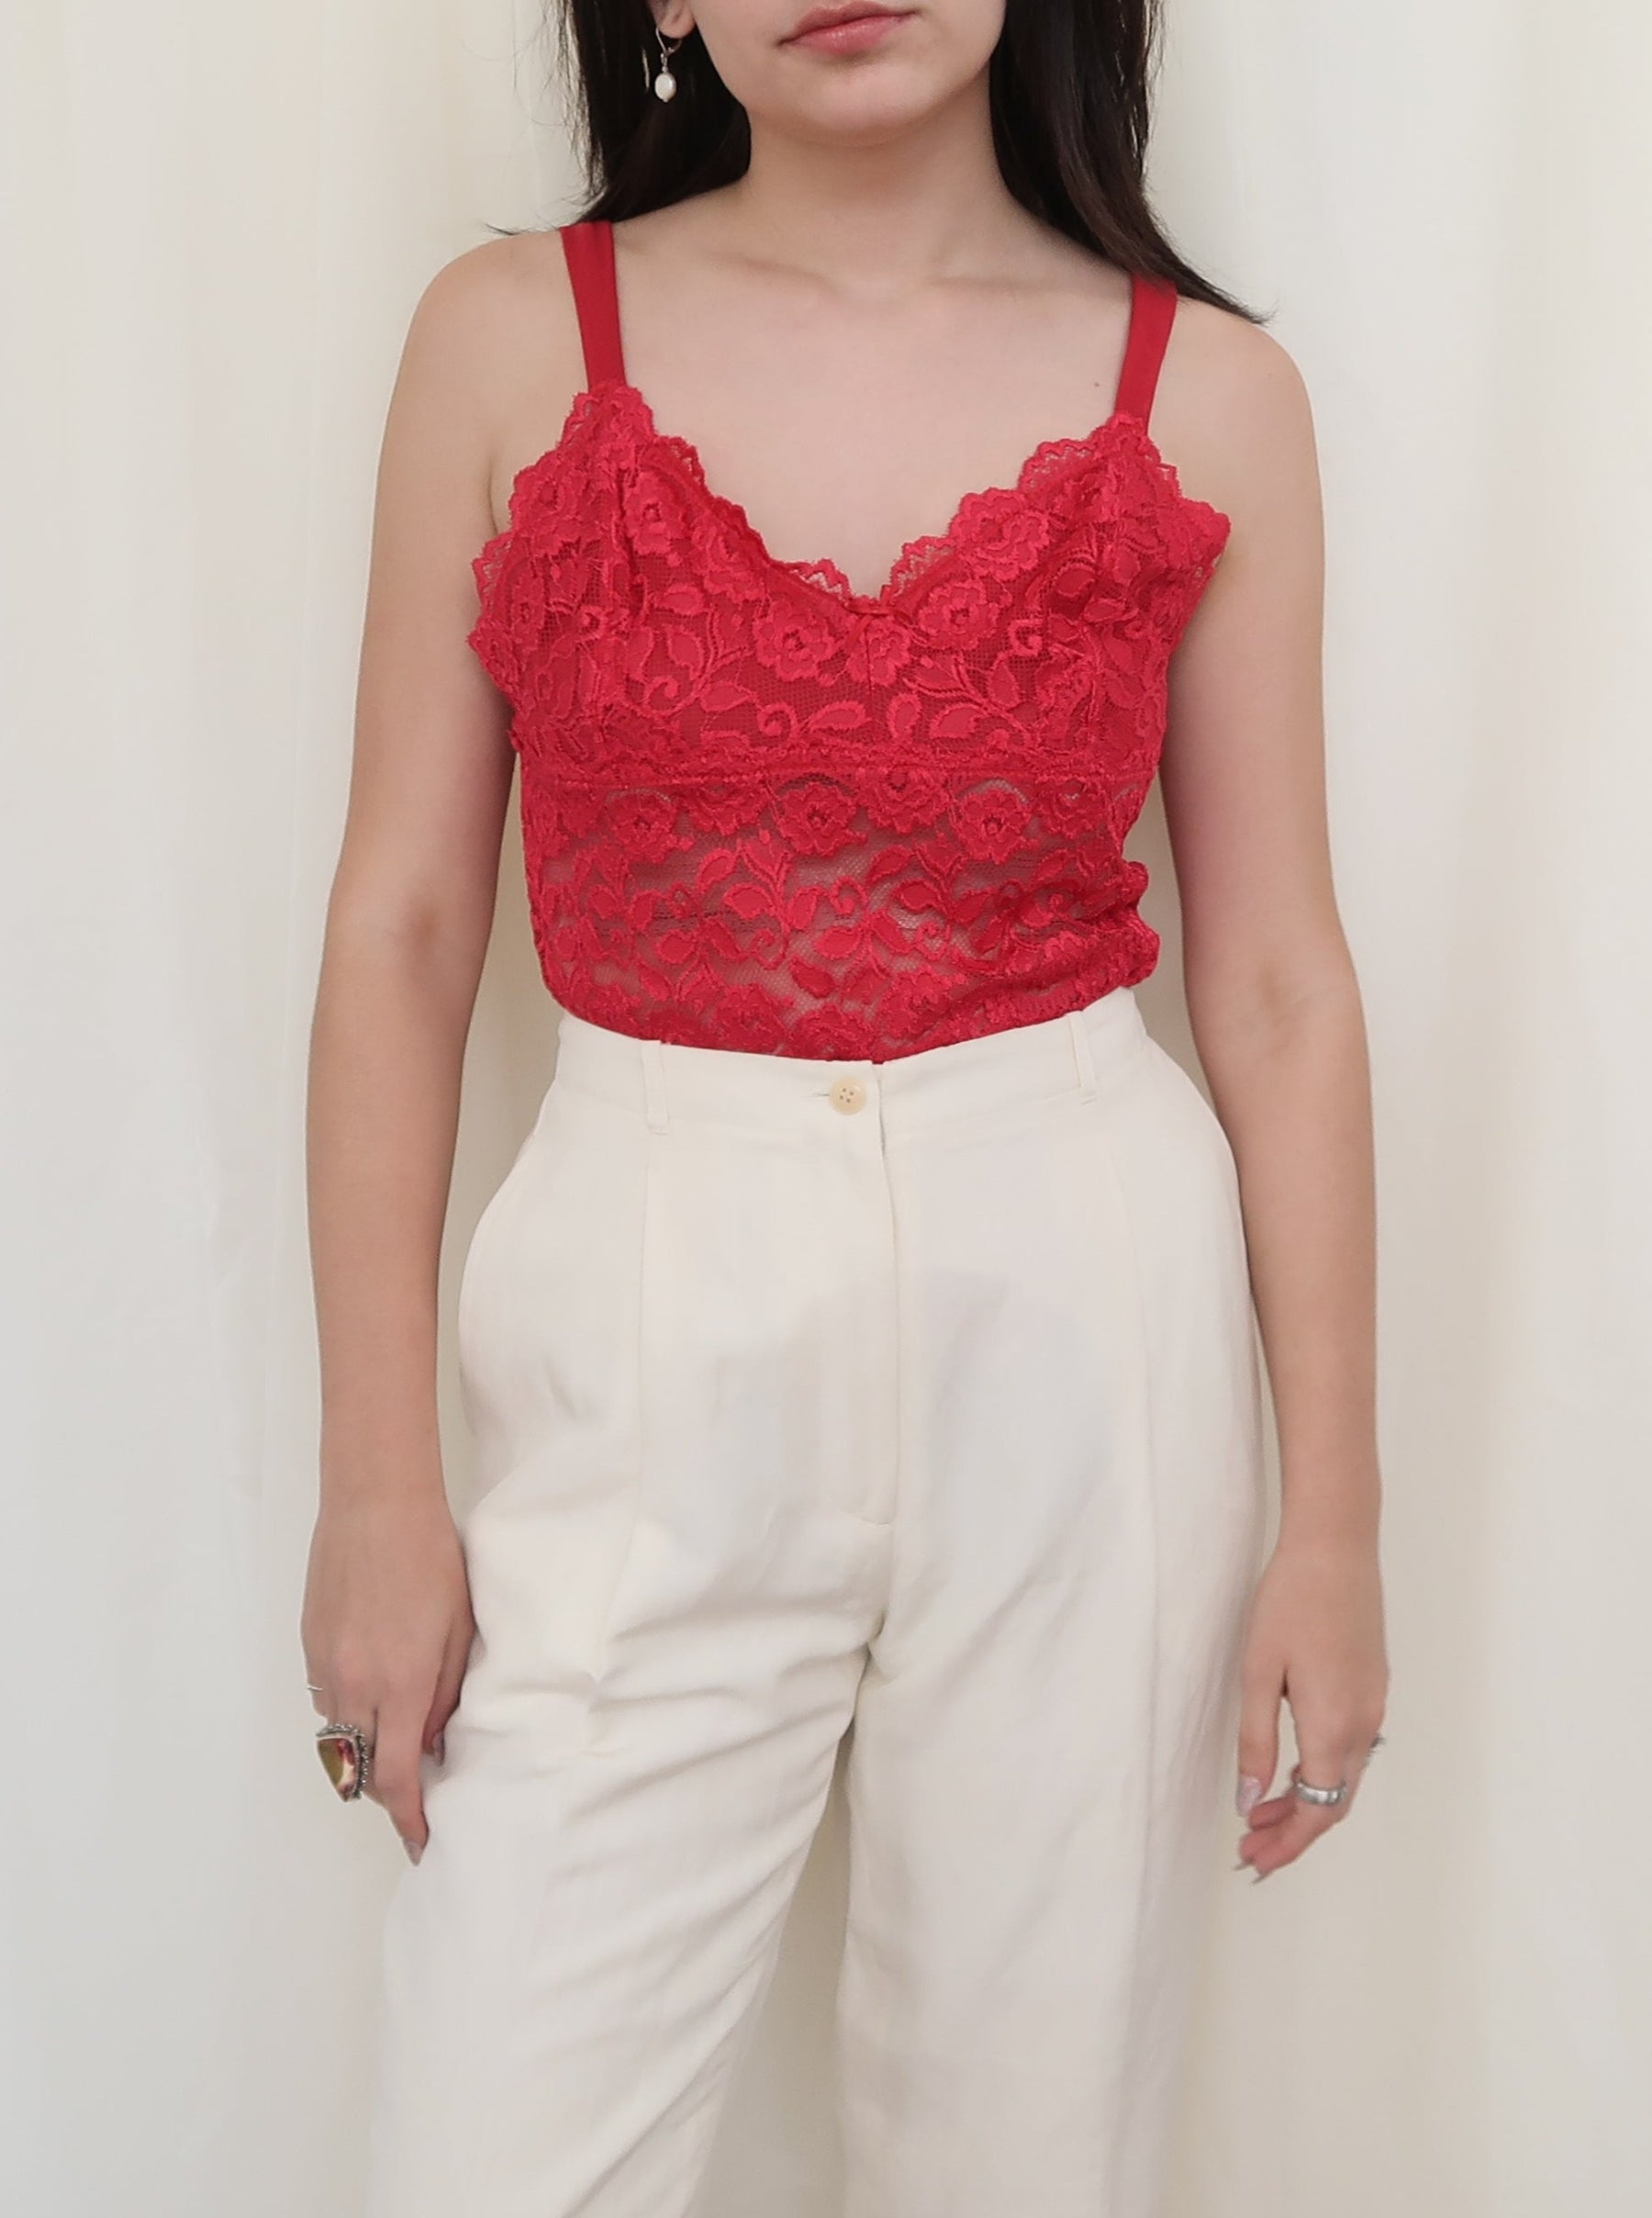 Y2k UNBRANDED LACE RED CAMISOLE - (SMALL)